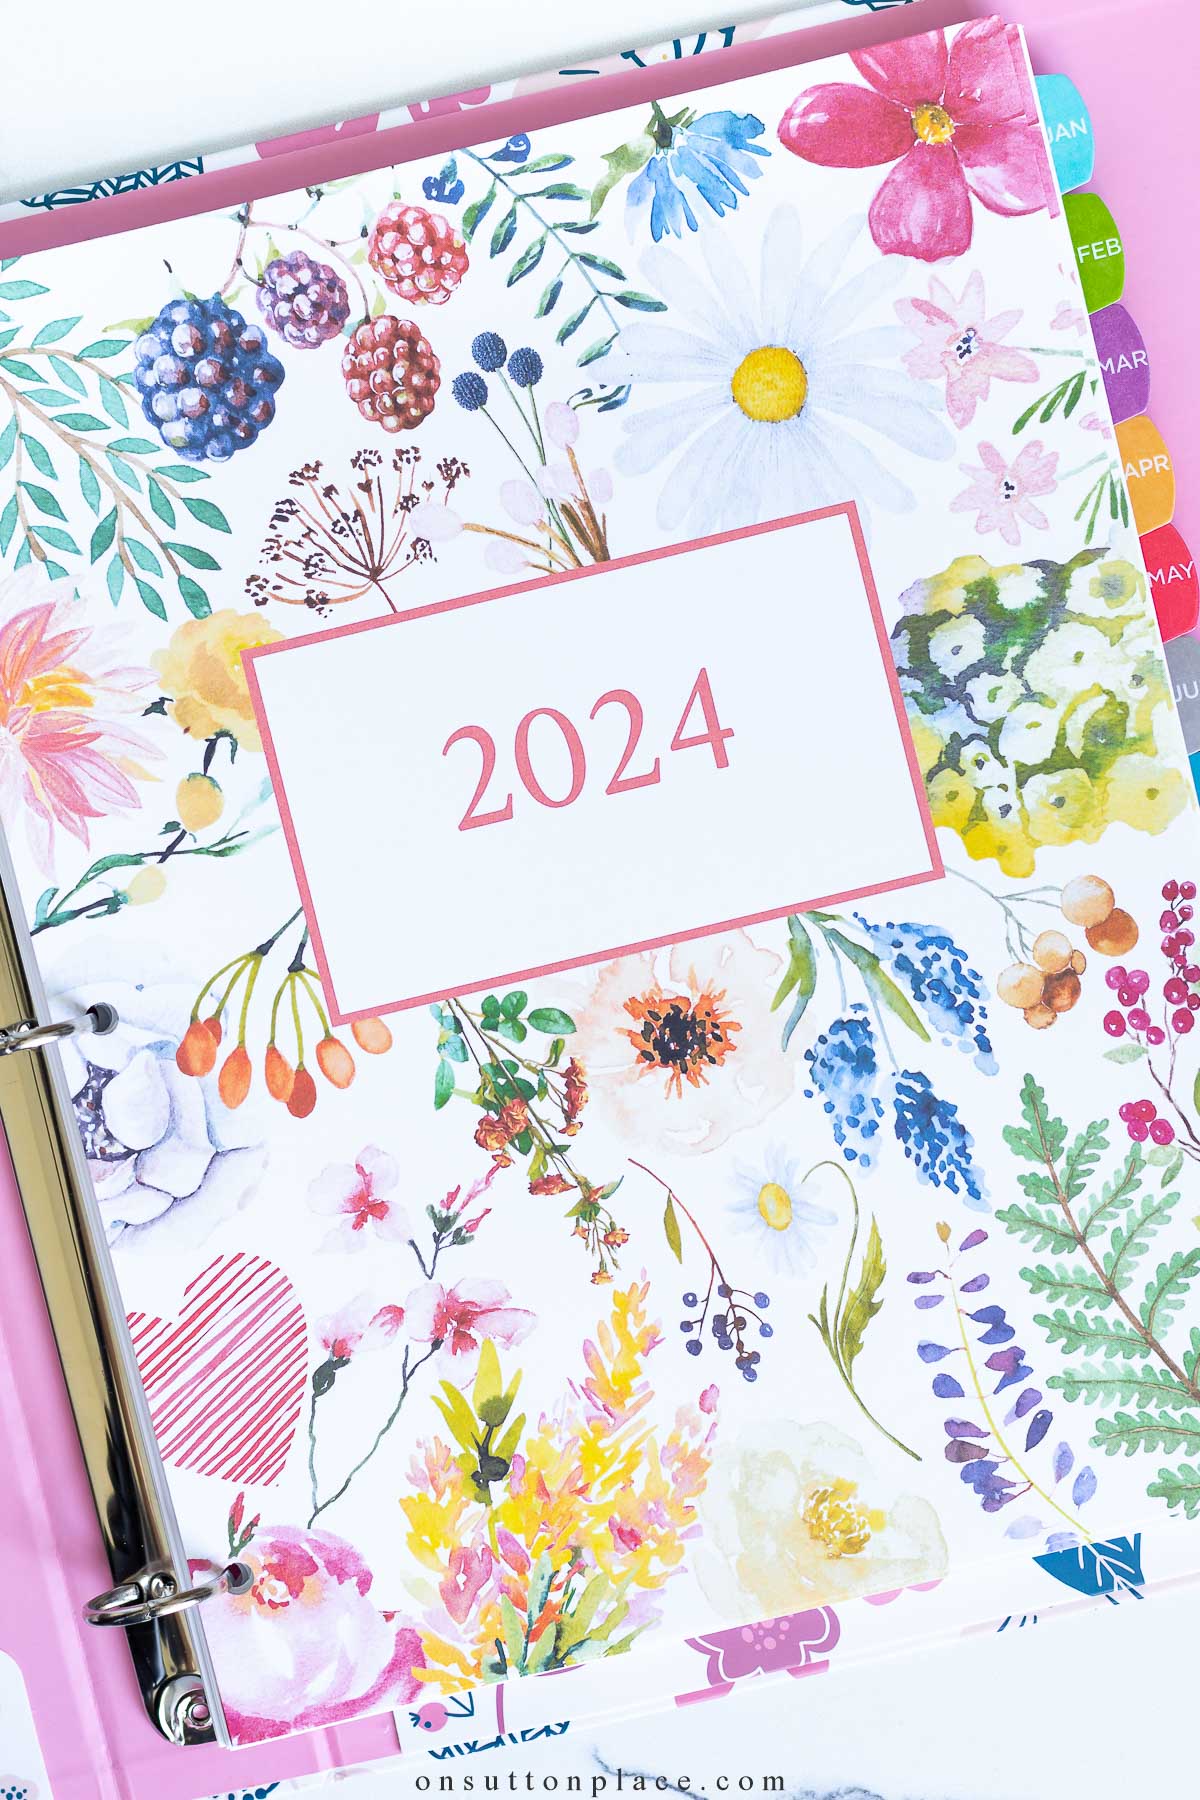 2024 Free Printable Calendar with Planner Pages - On Sutton Place